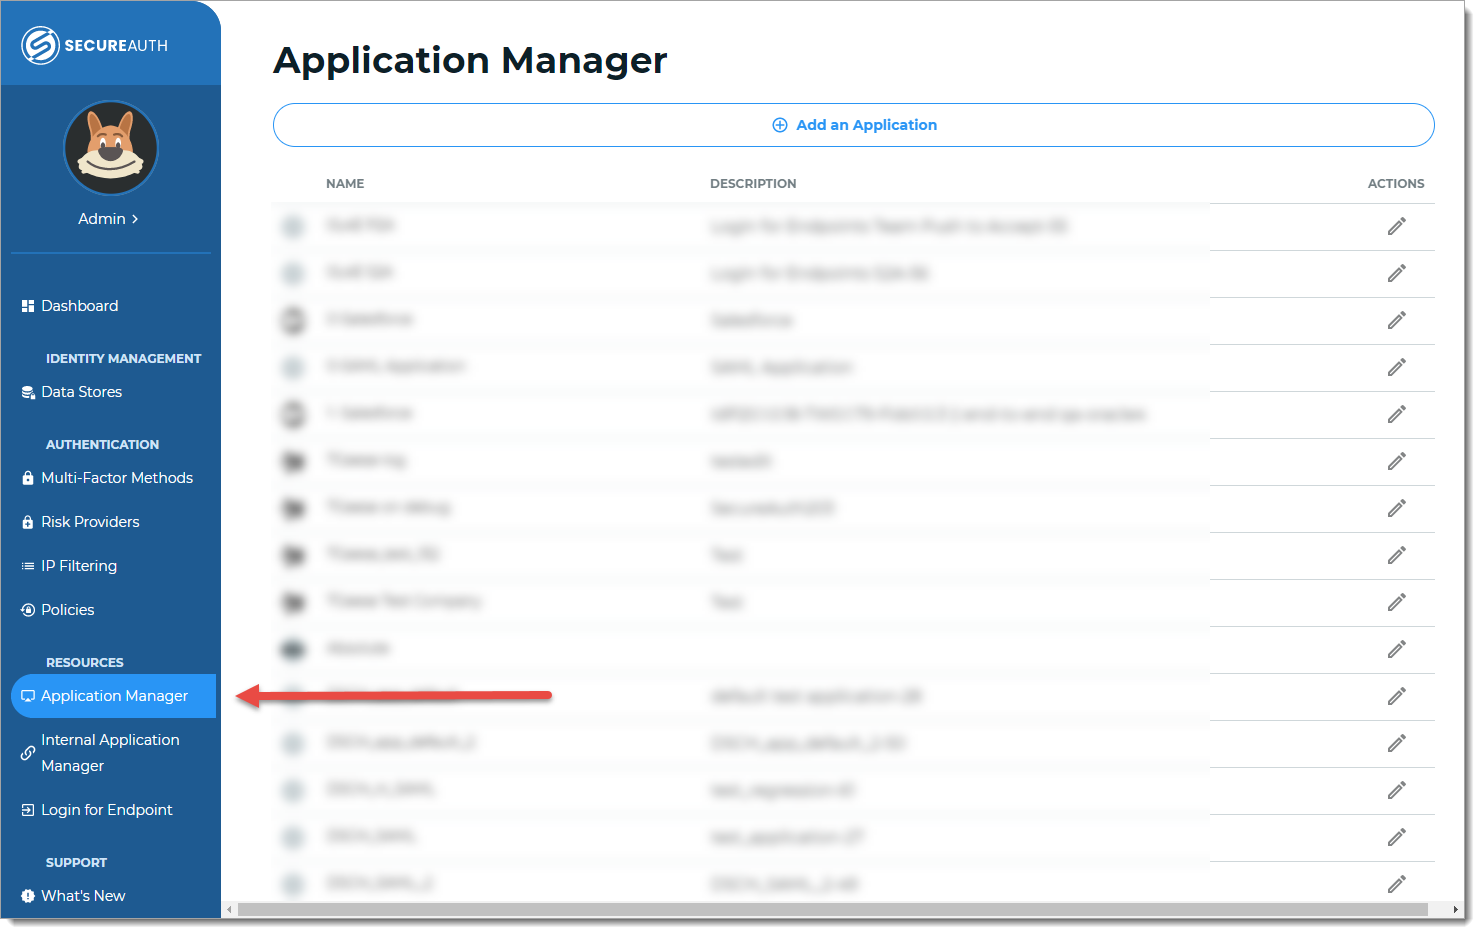 Application Manager page in the SecureAuth Identity Platform for third party application integrations